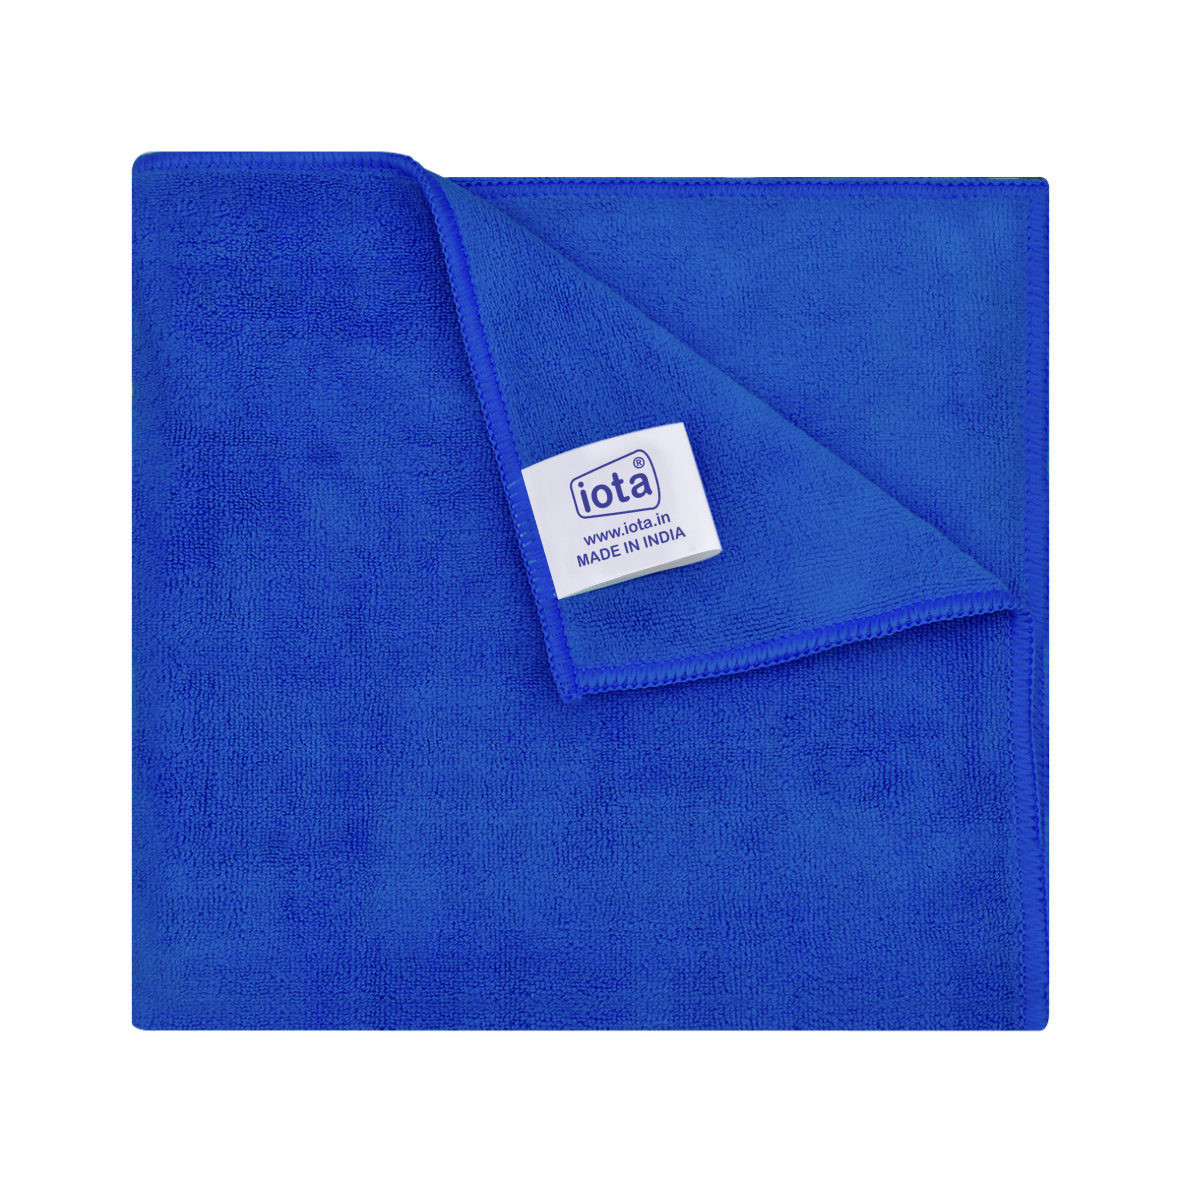 iota Microfiber Automotive Cleaning Cloth Highly Absorbent 40x40cms 450 GSM